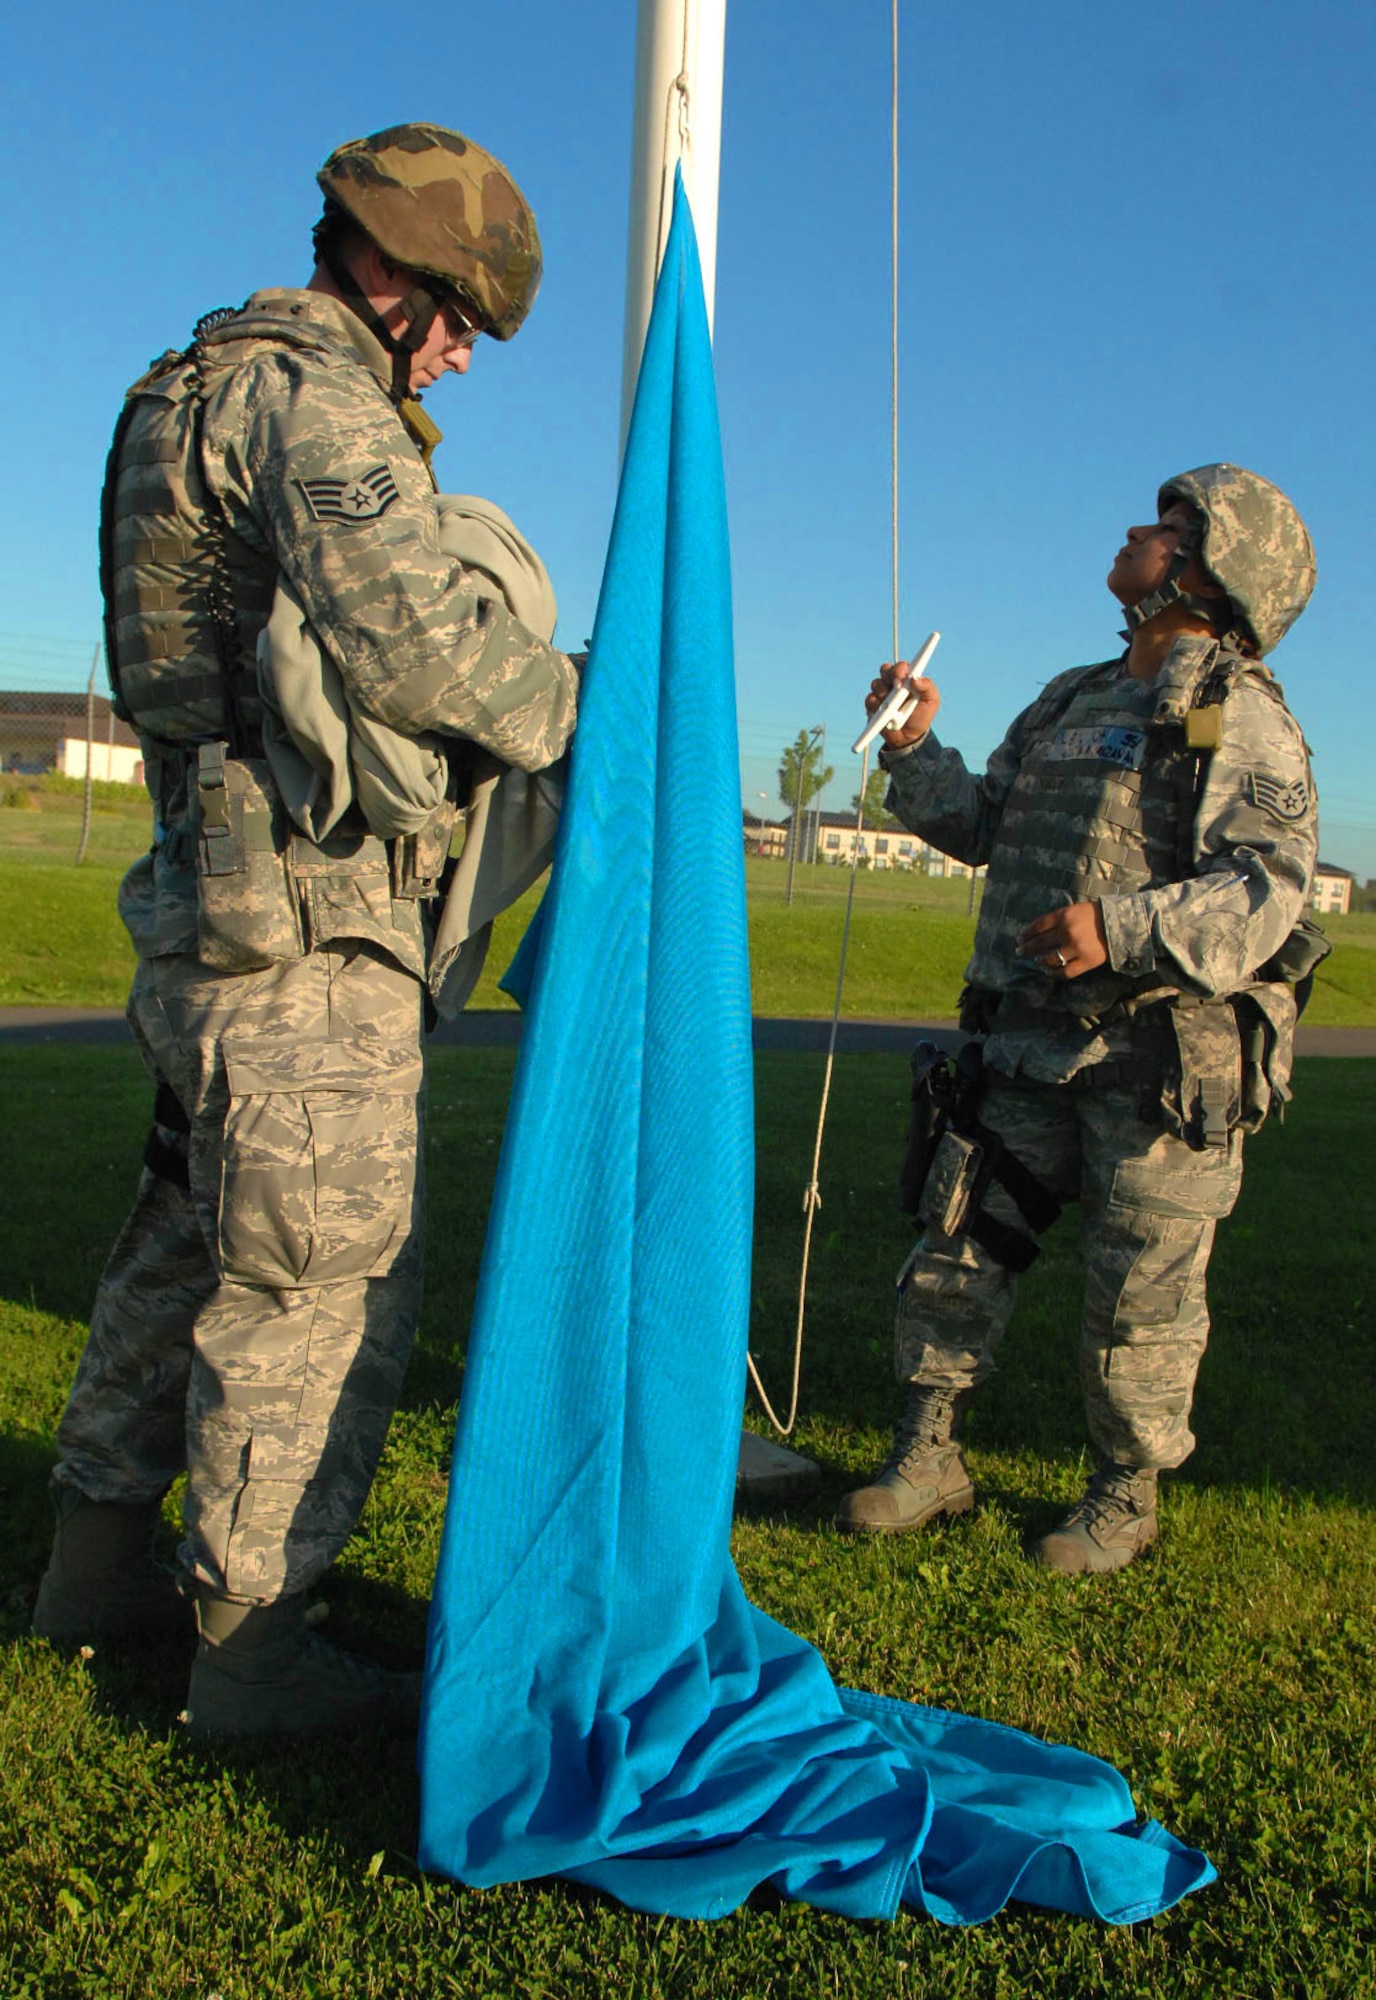 SPANGDAHLEM AIR BASE, Germany -- Staff Sgt. Corina Manzanares and Staff Sgt. Joseph Null, 52nd Security Forces Squadron, prepare to raise a U.S. Air Forces in Europe communication flag at the front gate Aug. 4 during a base-wide exercise in preparation of a NATO Tactical Evaluation scheduled for 2010. USAFE headquarters periodically selects colored flags to be raised as part of a force-protection measure to evaluate base response times. (U.S. Air Force photo/ Airman 1st Class Nick Wilson)